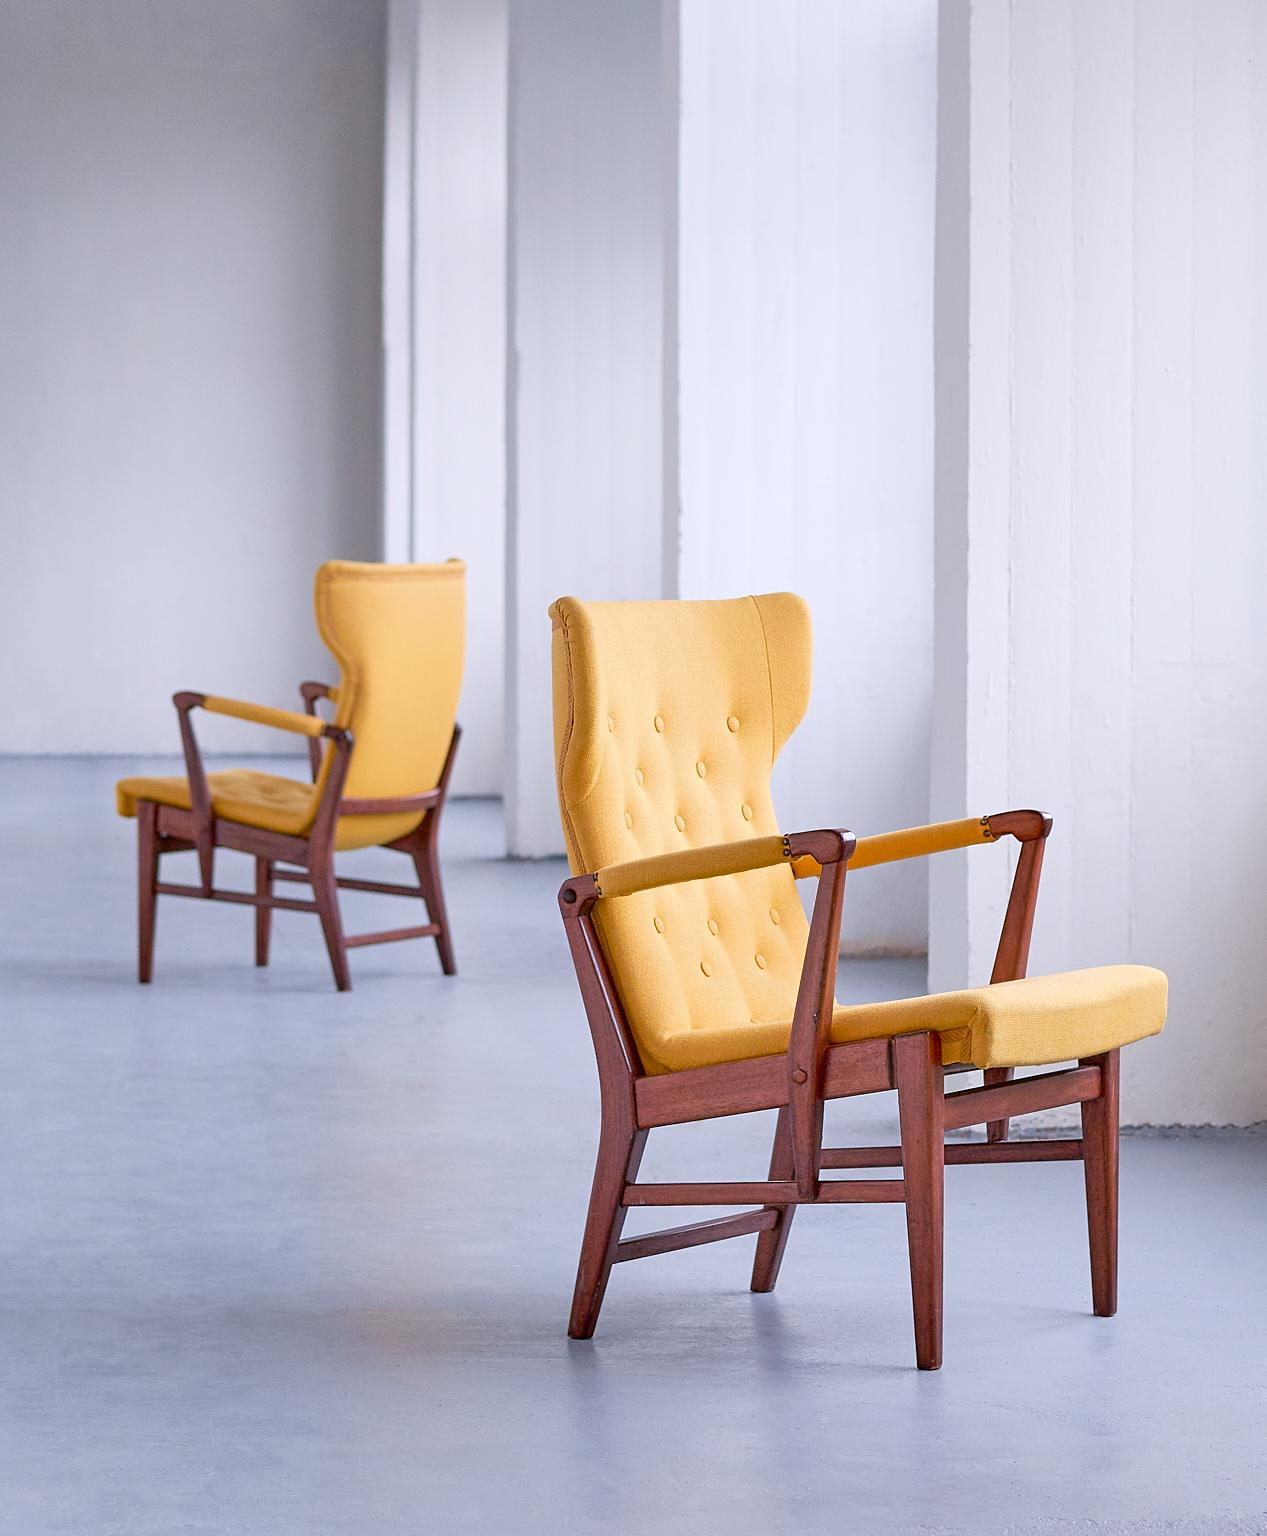 This rare pair of armchairs was designed by Bertil Söderberg and produced by Nordiska Kompaniet in Sweden in the 1940s. The elegant shape of the design is emphasized by the buttoned wing shaped back and seat. The mahogany frame is connected with